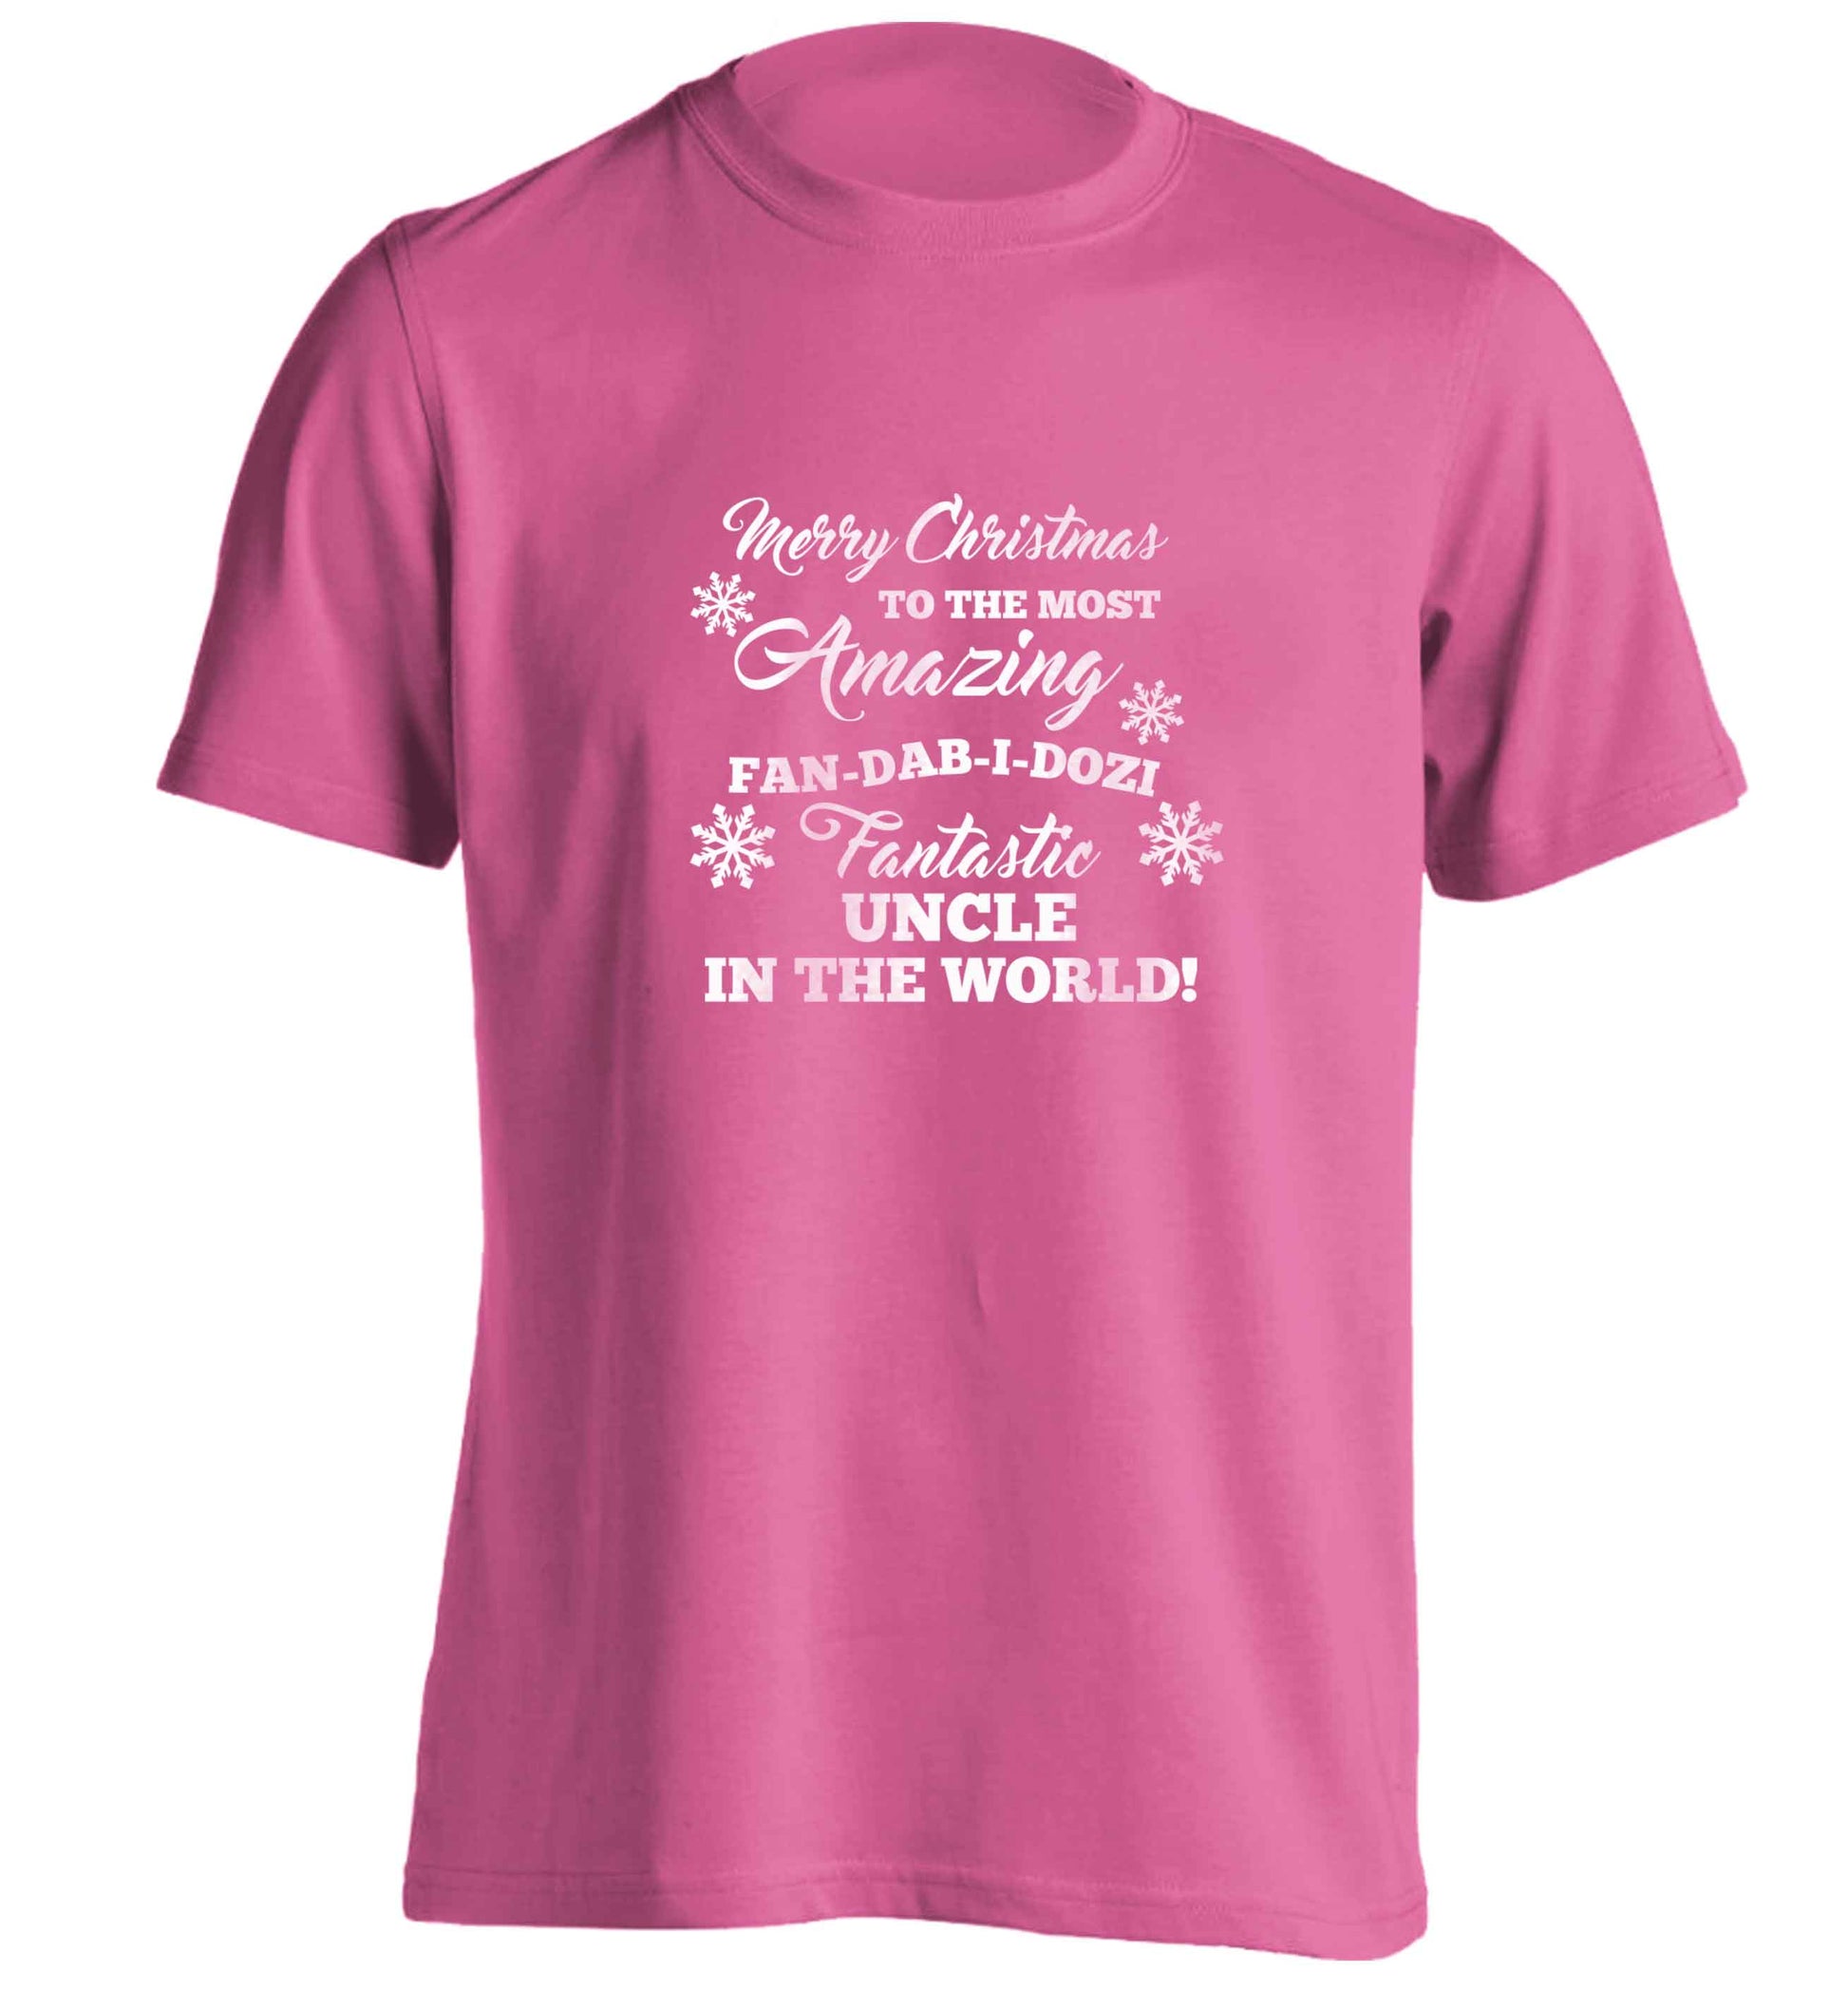 Merry Christmas to the most amazing fan-dab-i-dozi fantasic Uncle in the world adults unisex pink Tshirt 2XL